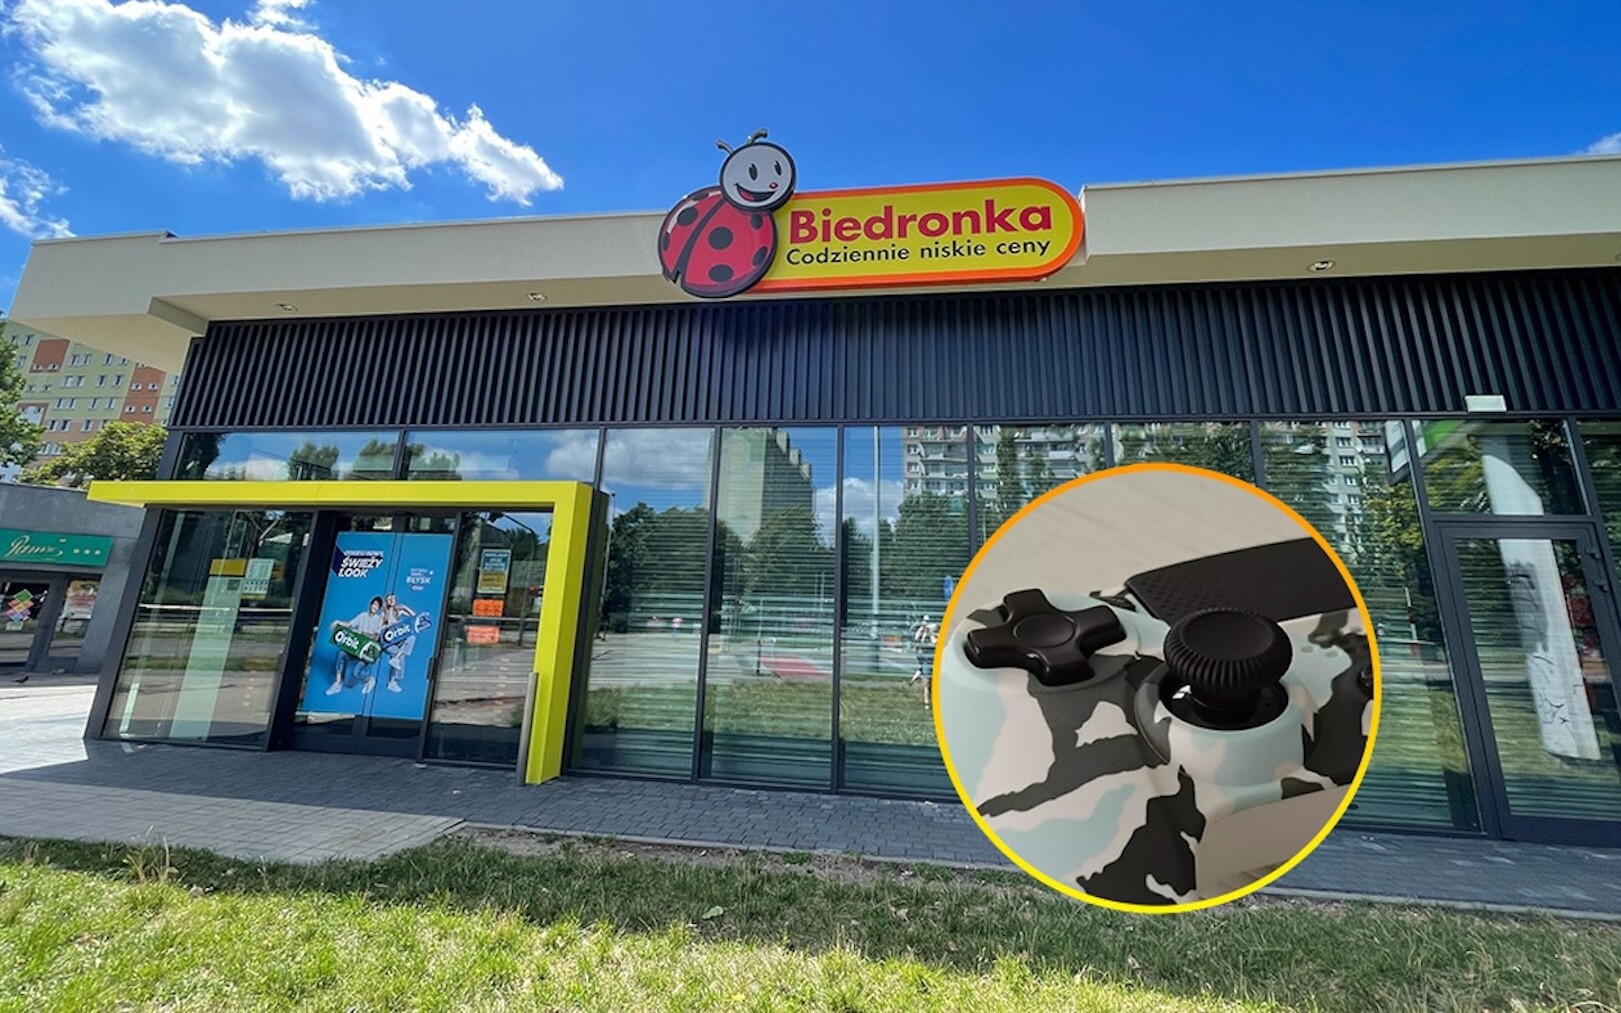 Electronics from Biedronka for PLN 149. I checked what it can do